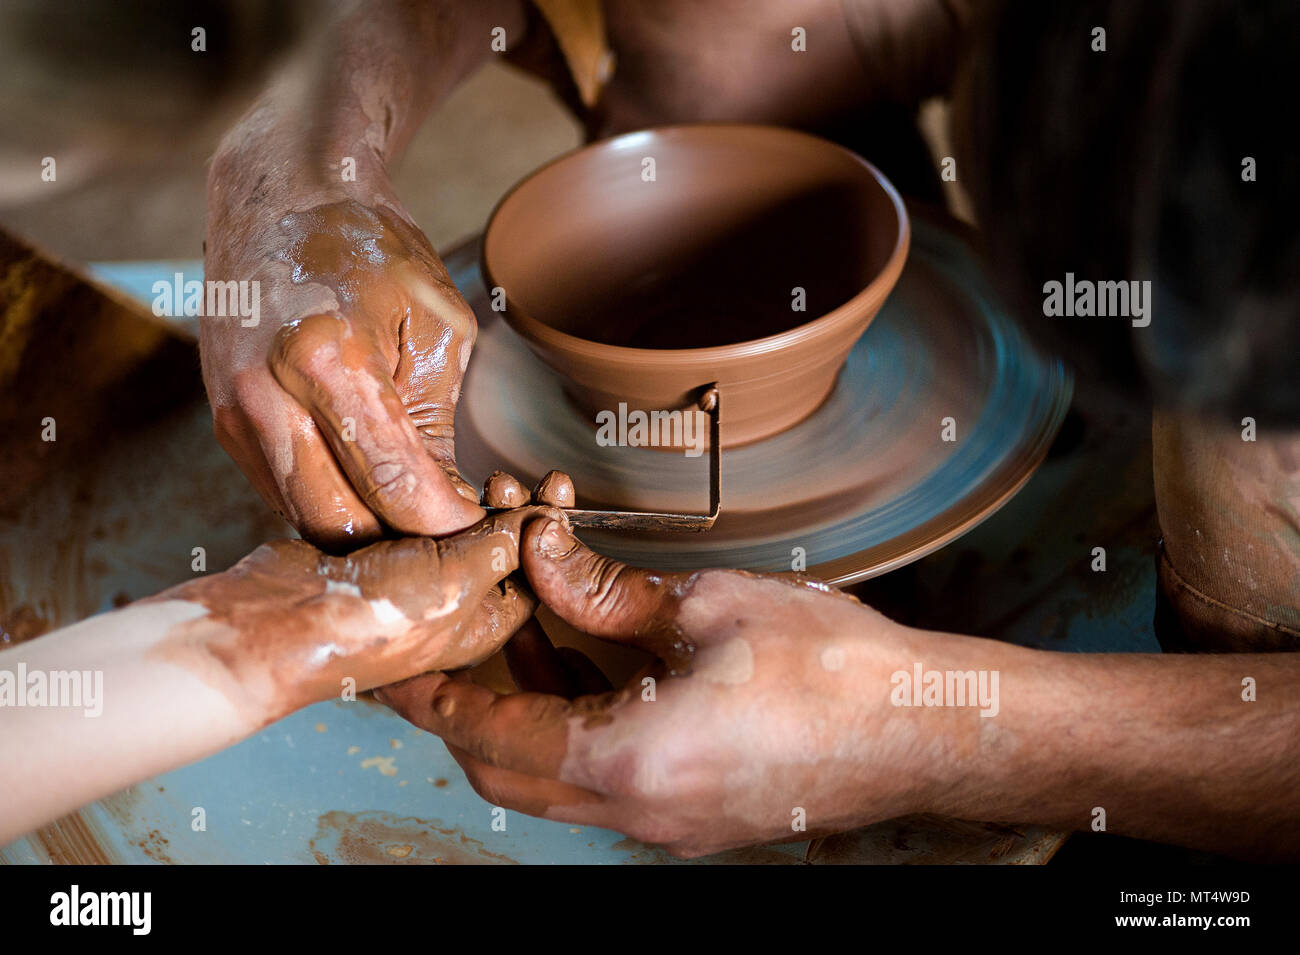 Potter's hands guiding child's hands to help him to work with the pottery wheel Stock Photo